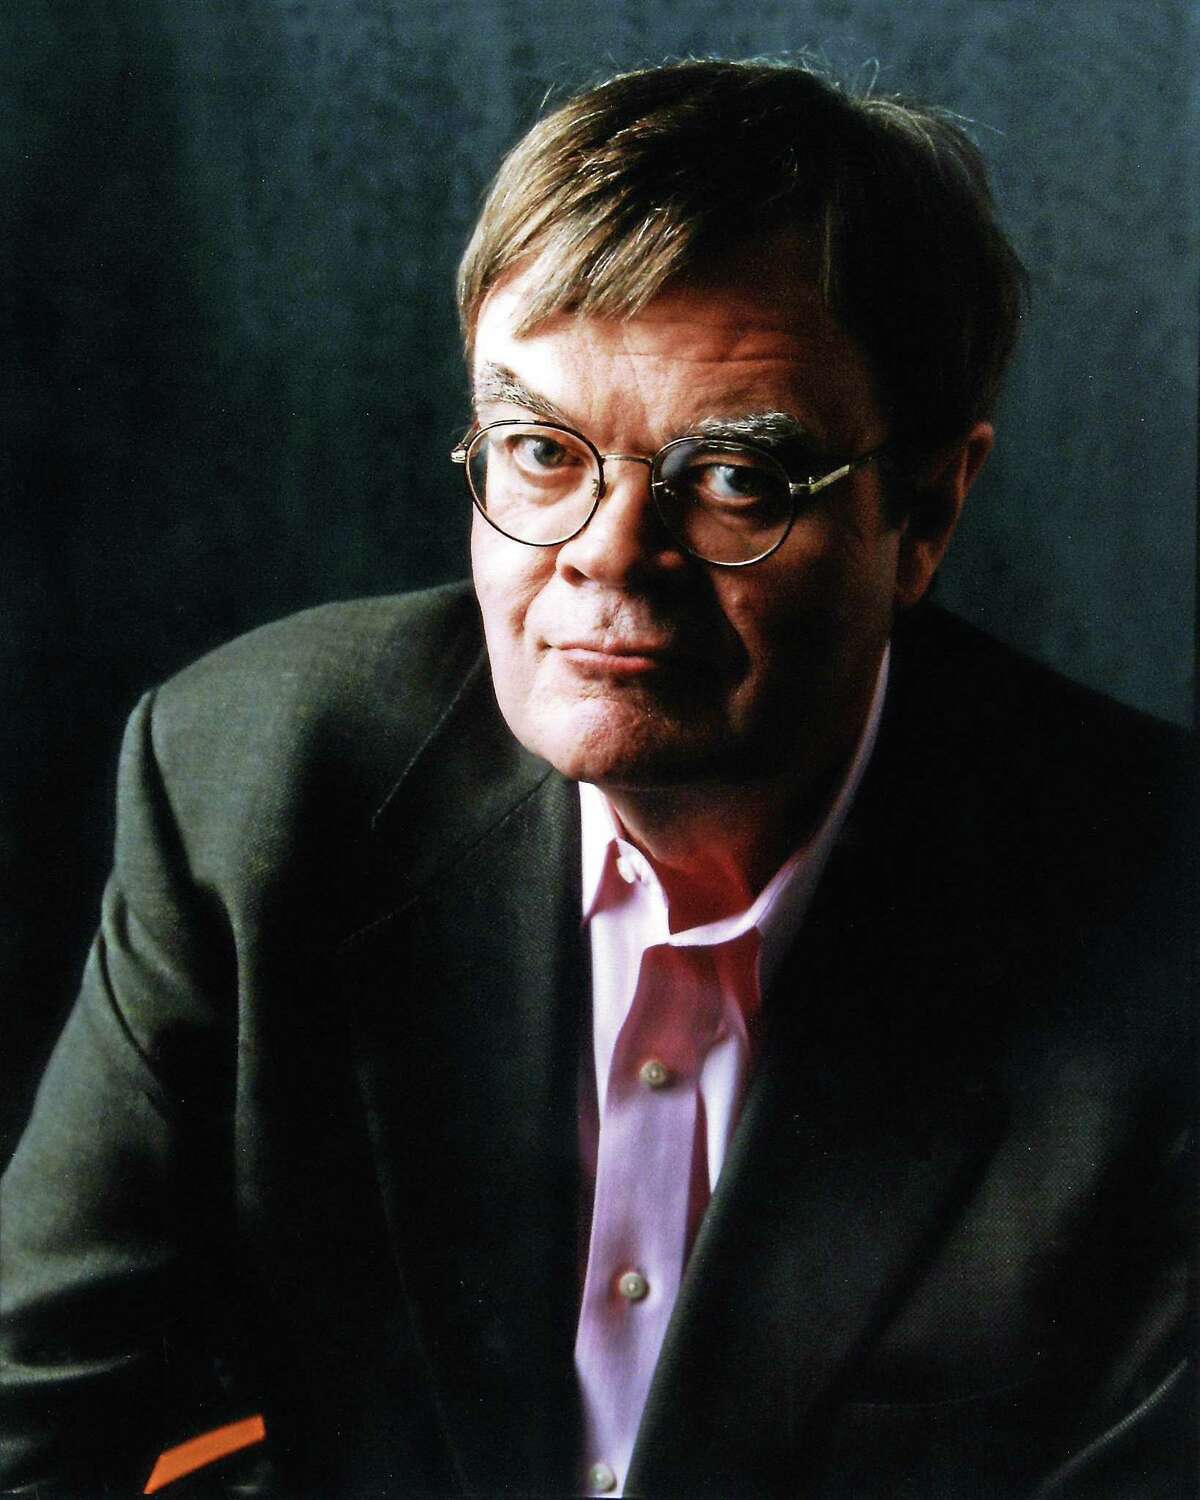 “I’m finishing up a ‘Lake Wobegon’ screenplay, working on a novel about a comedian, sketching out a Christmas musical, and so it goes,” says Garrison Keillor, in advance of his show tonight at SCSU.